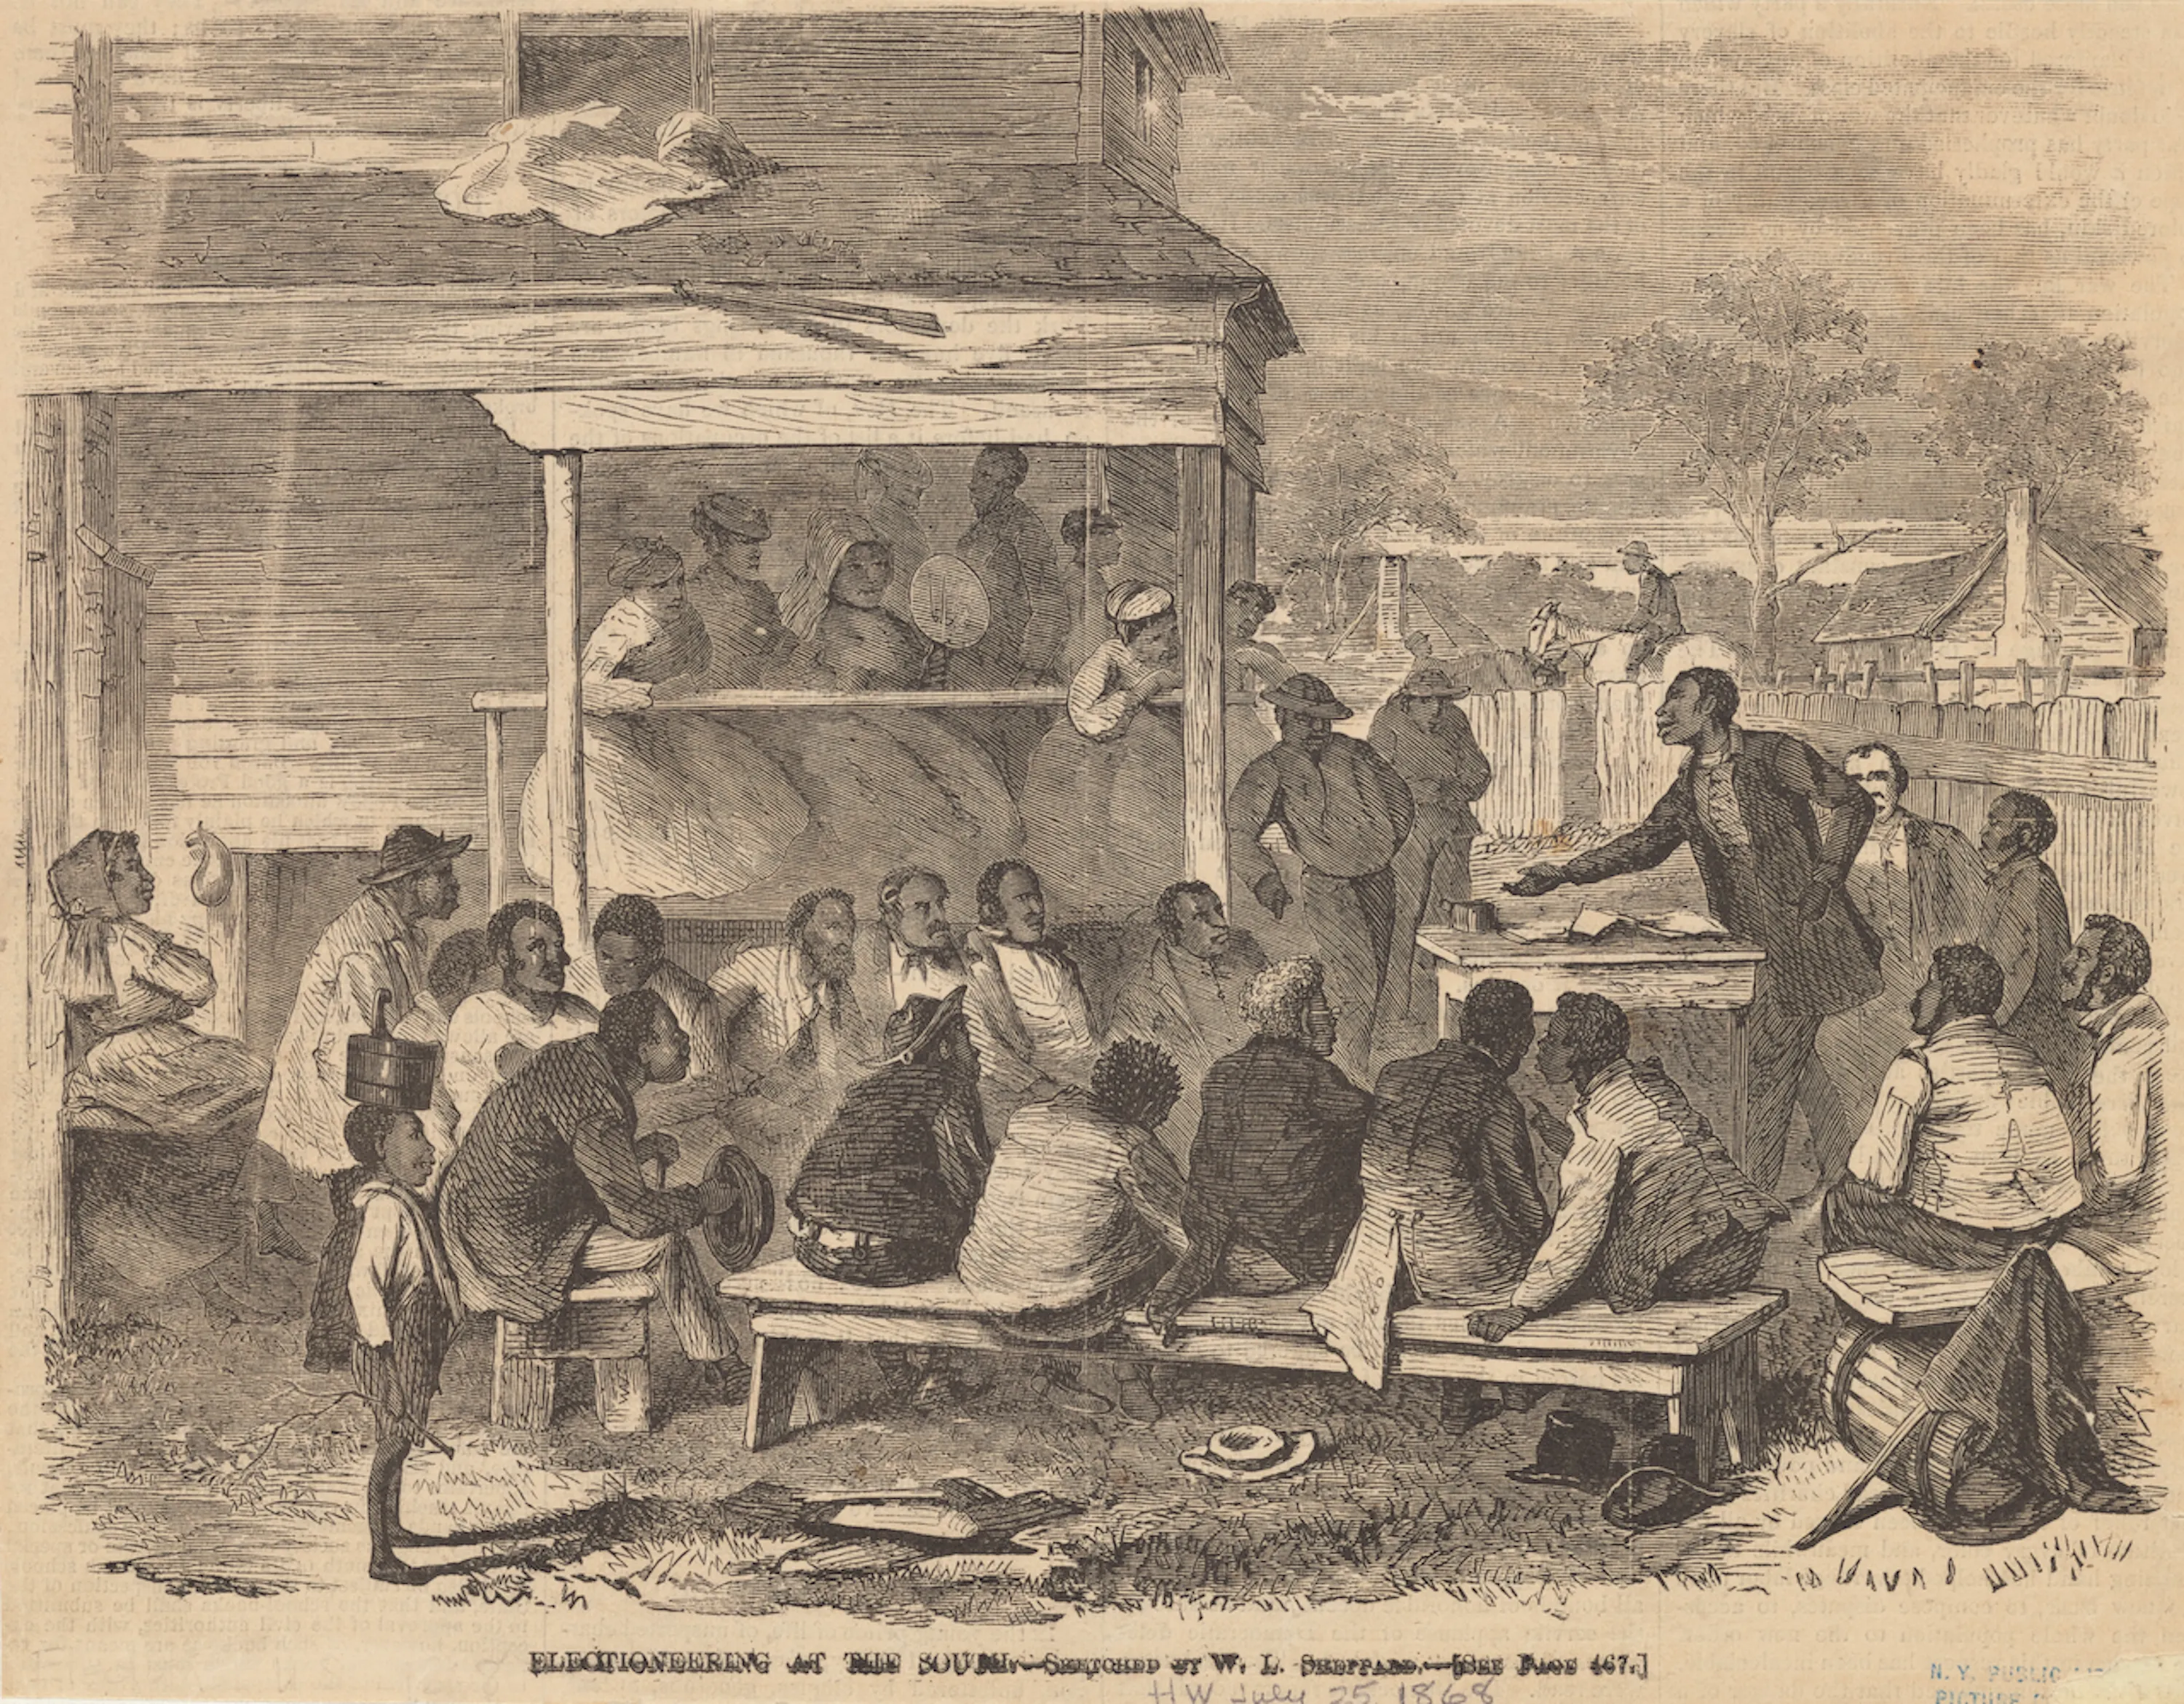 Illustration of African Americans